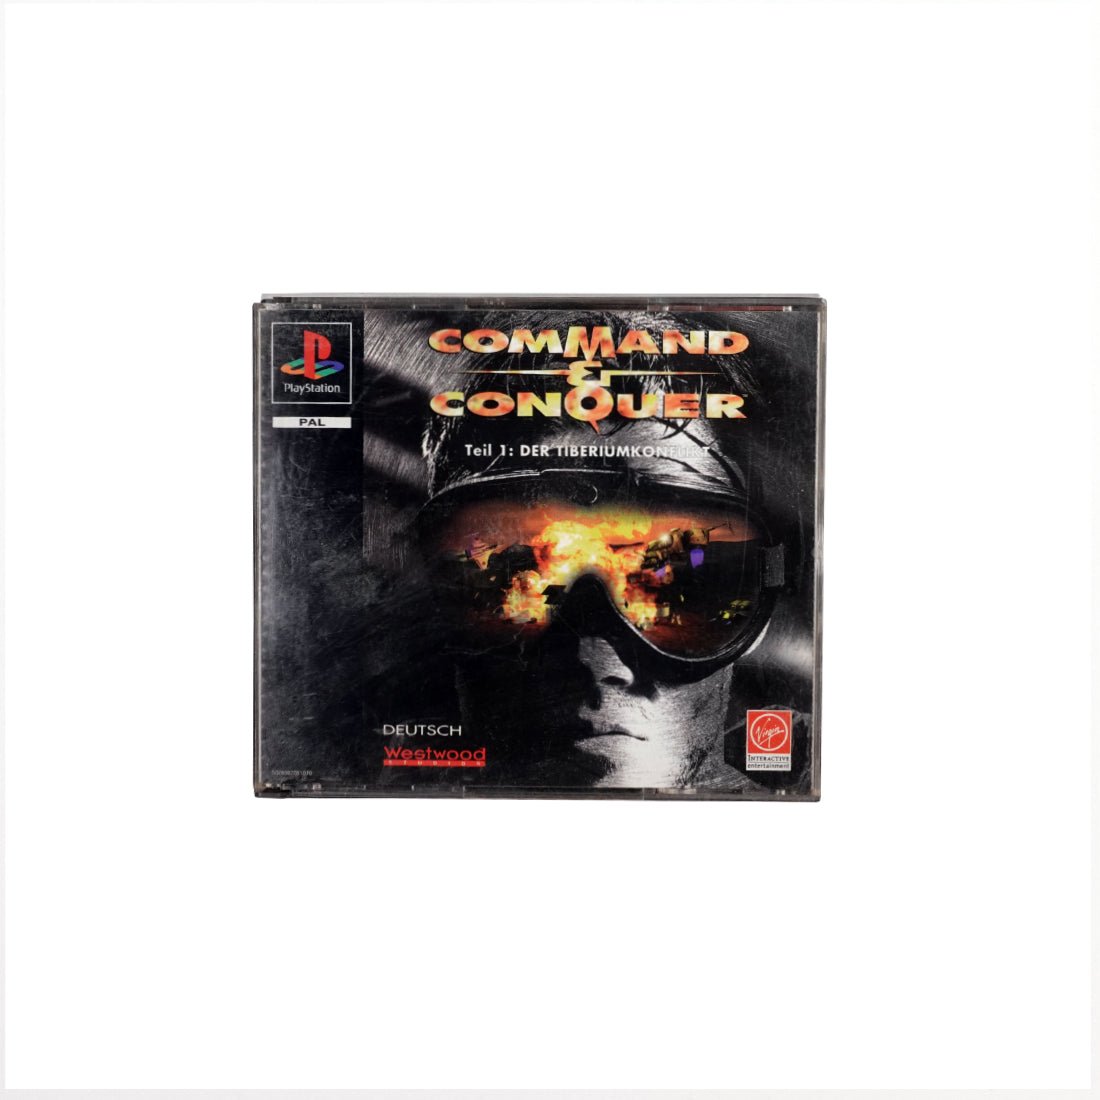 (Pre-Owned) Command & Conquer: German Edition - PlayStation 1 - Store 974 | ستور ٩٧٤